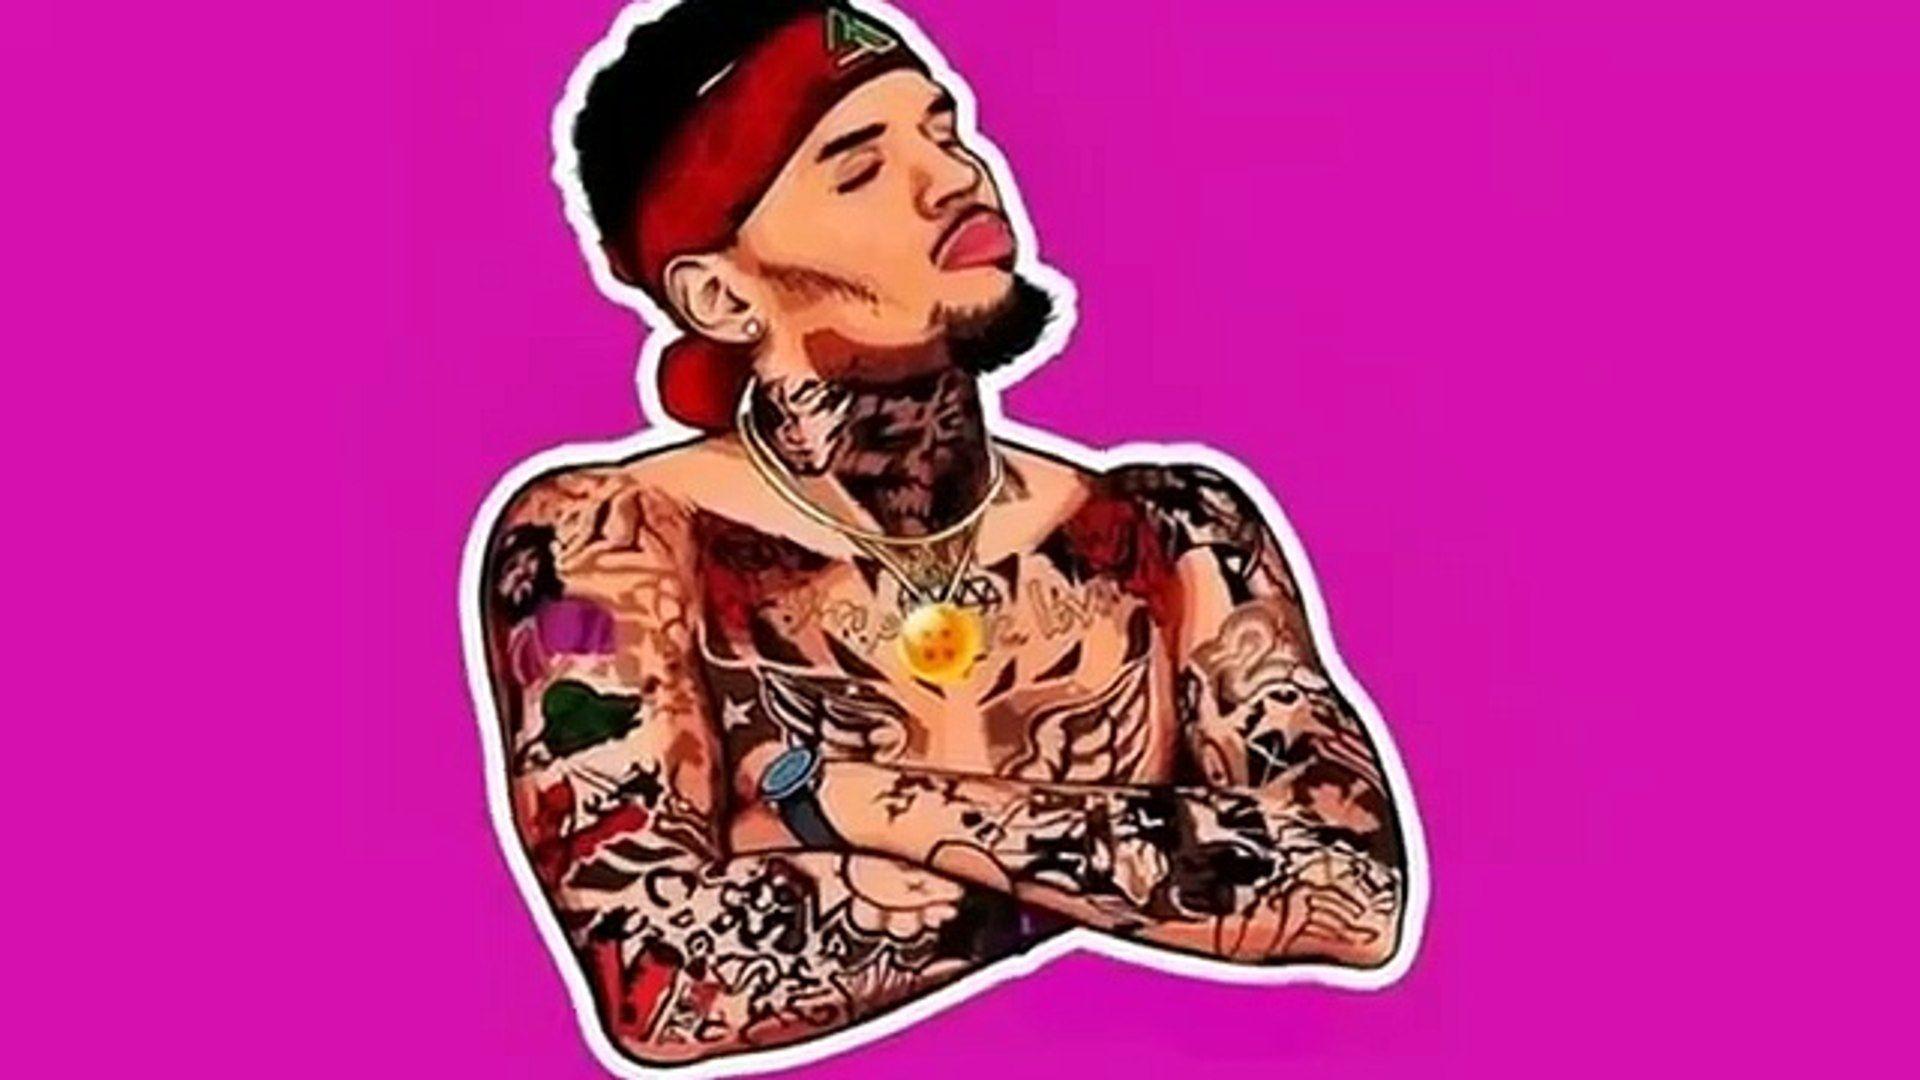 chris brown wall to wall mp3 free download